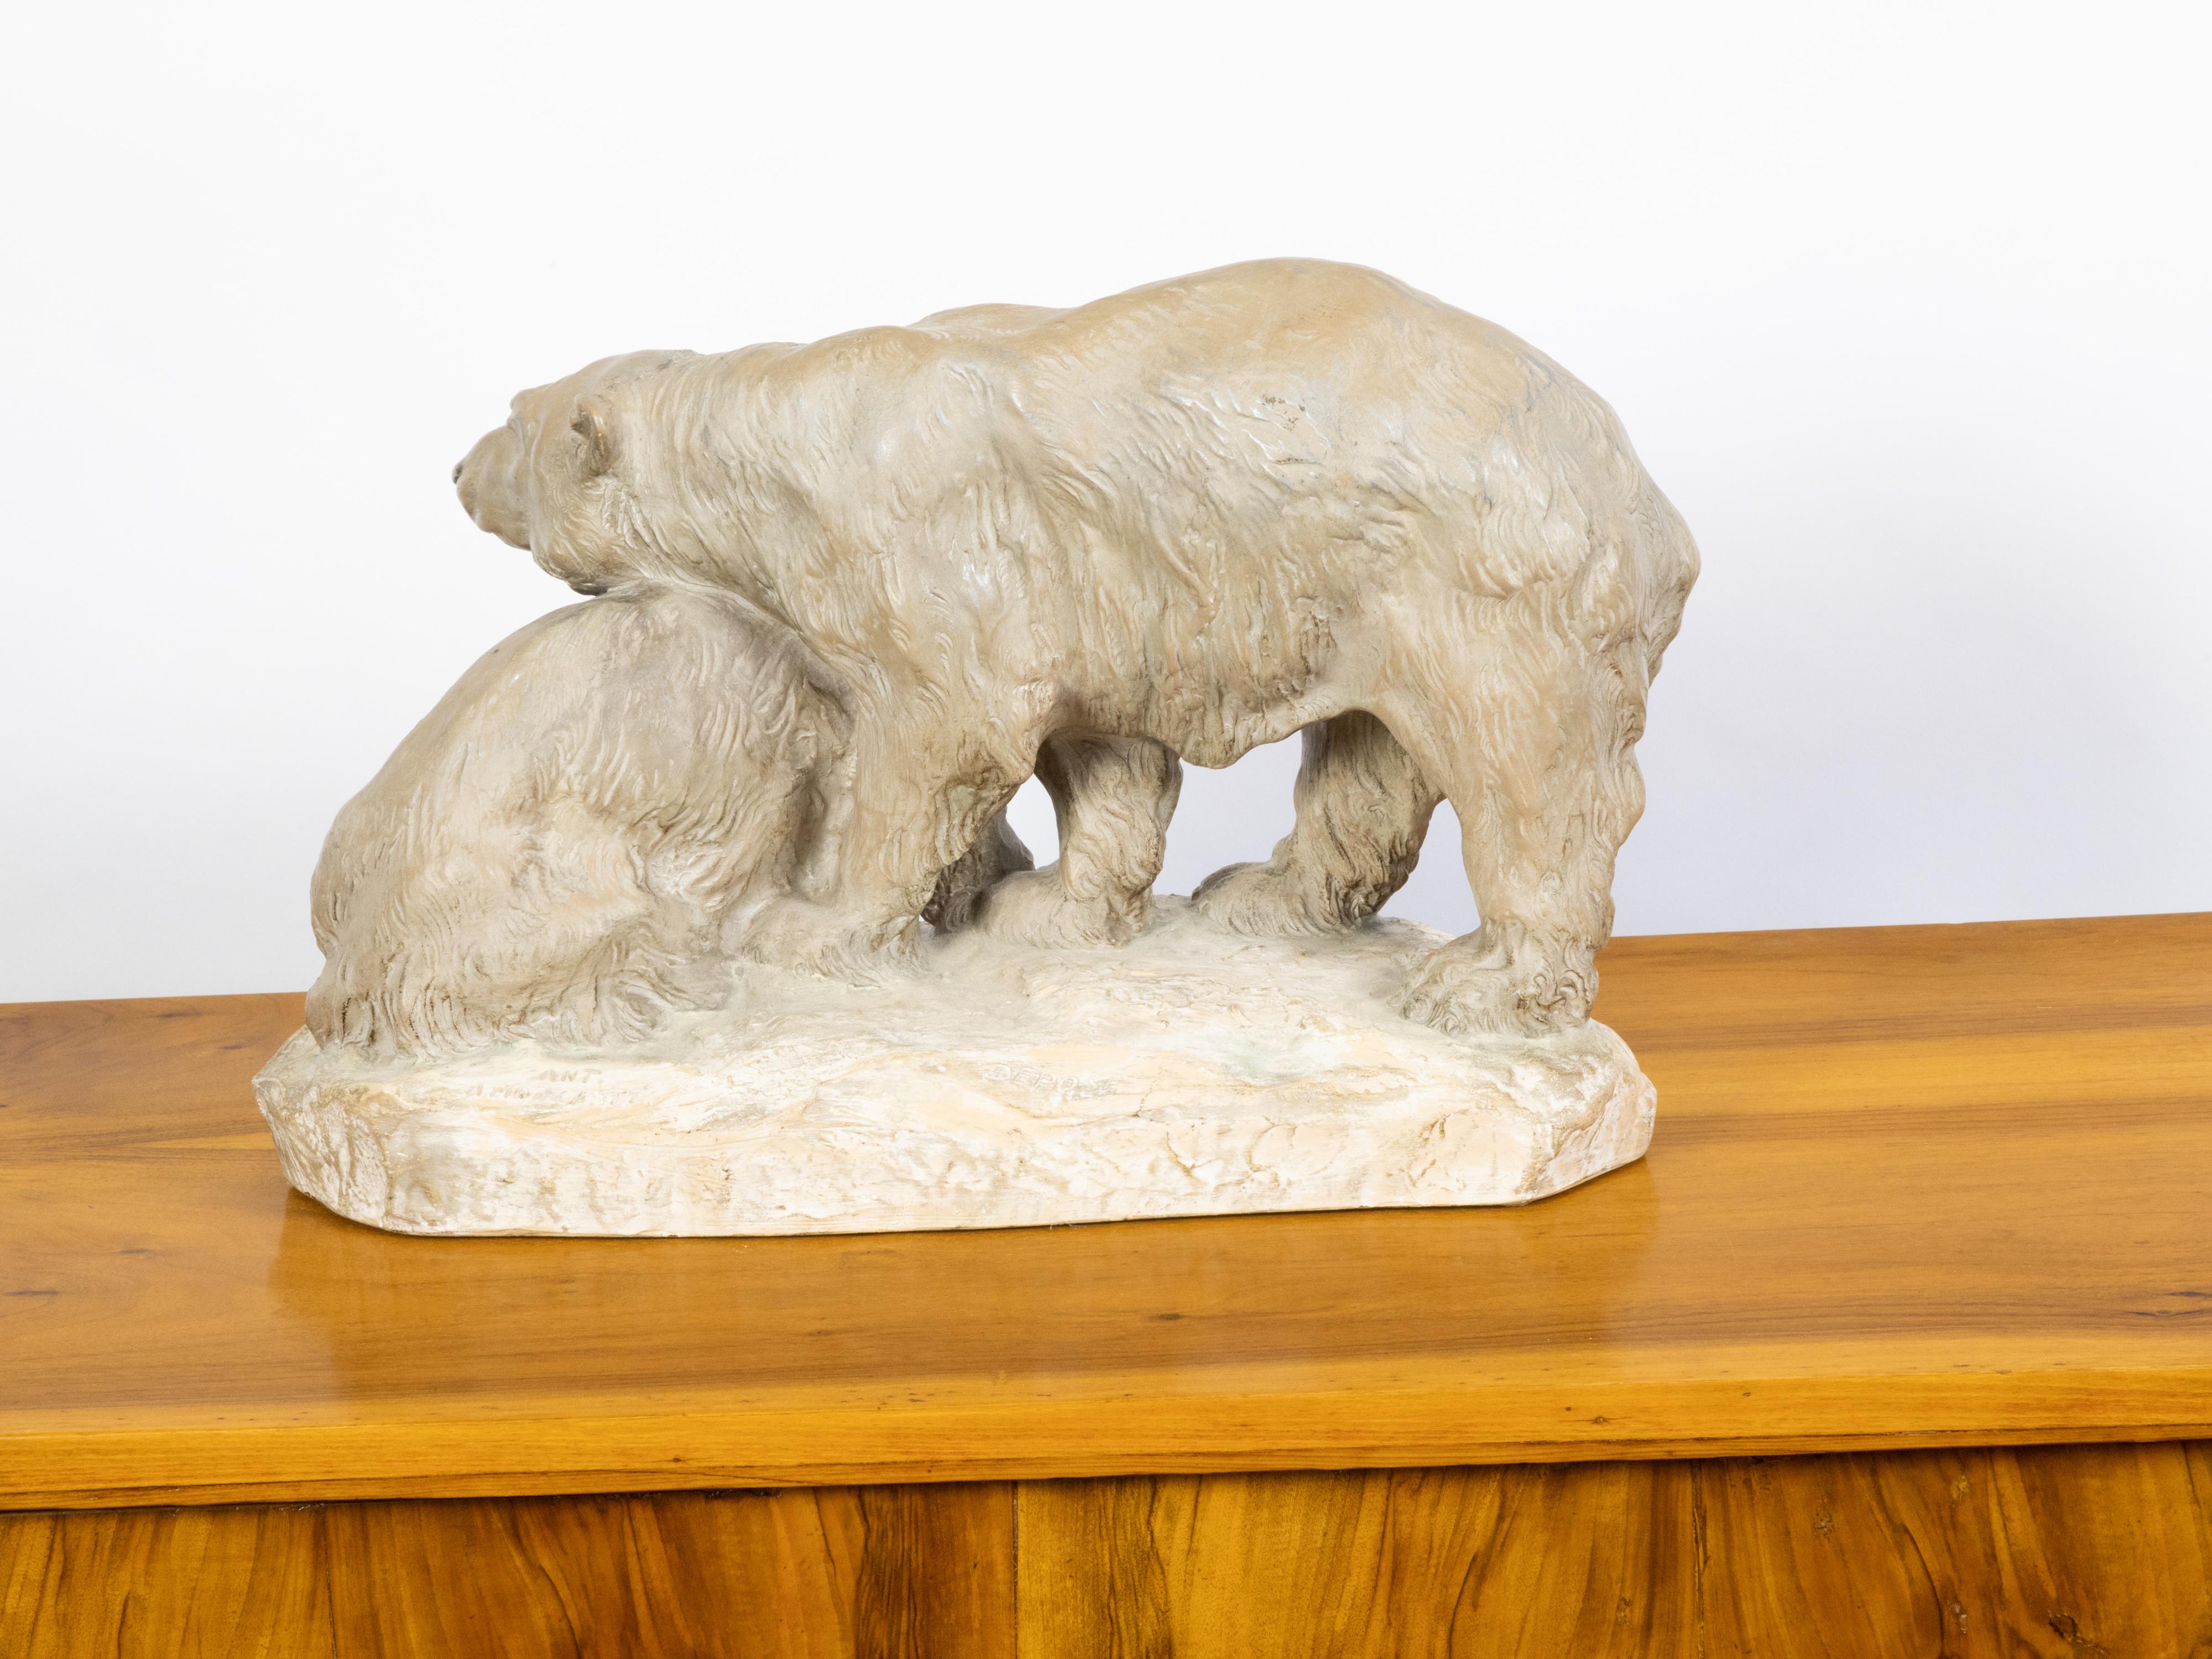 Continental Midcentury Terracotta Sculpture Depicting Two Bears on a Base For Sale 2